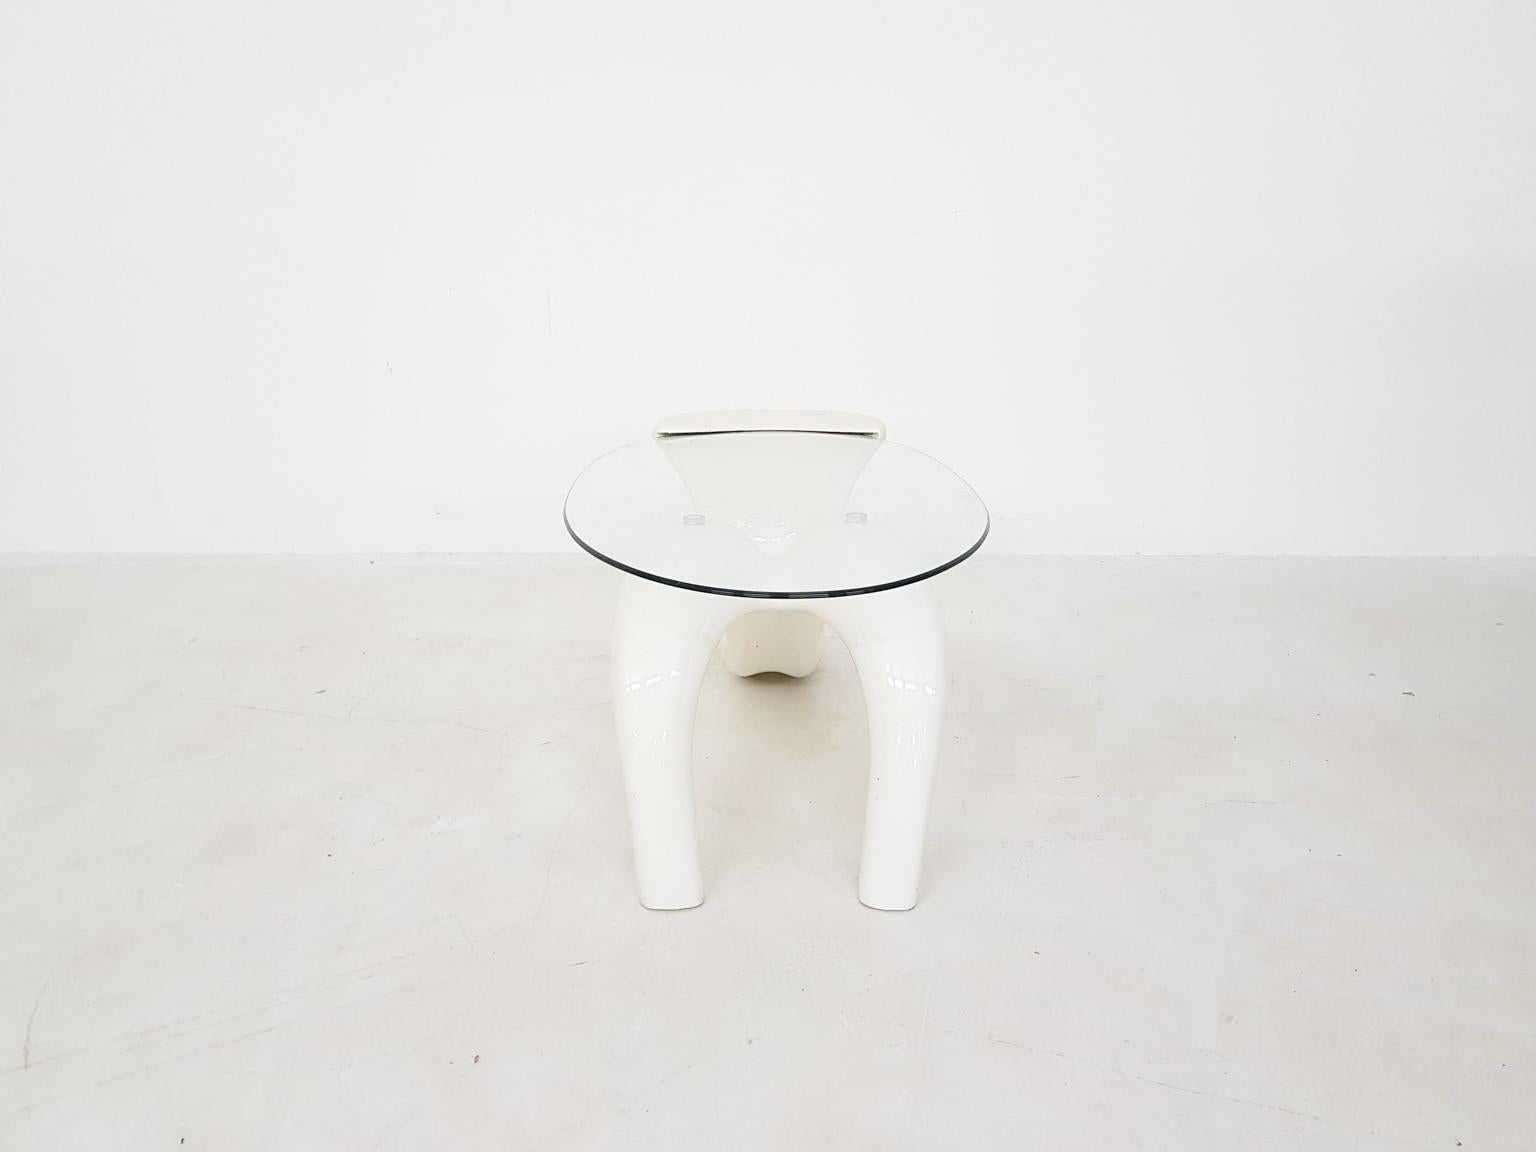 Mid-Century Modern Abstract Human Shaped Coffee Table in White Fibreglass from the Midcentury